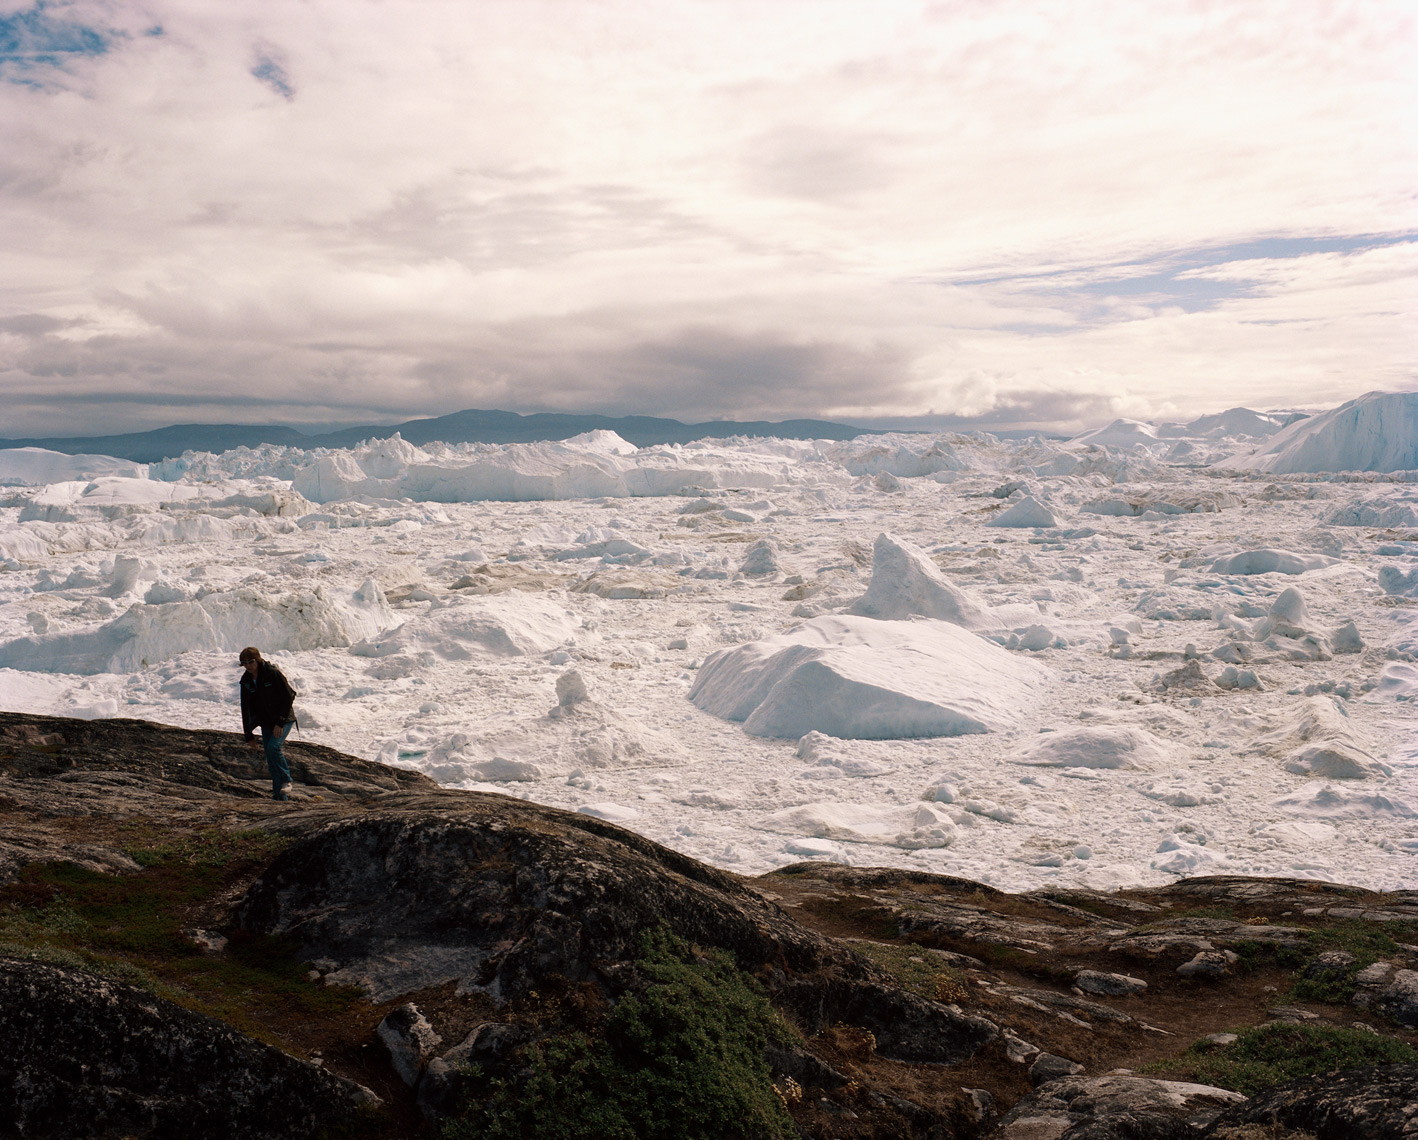 GREENLAND, Ilulissat, Ilullisat Icefjord, woman walking with glaciers in the background